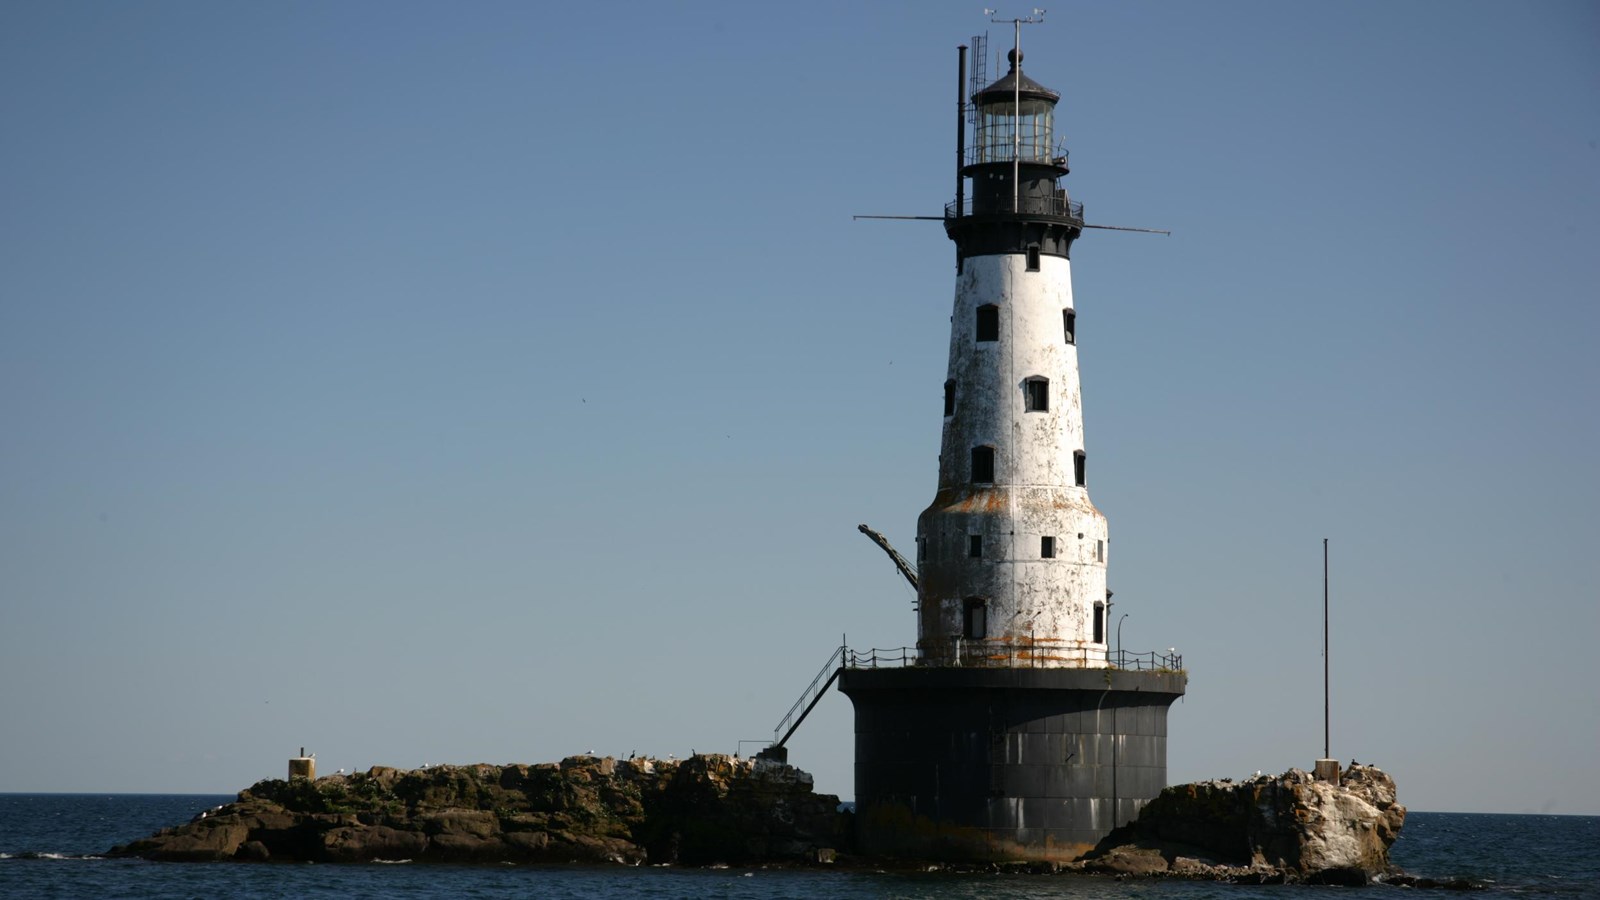 image of a lighthouse jutting up from a desolate, tiny rocky reef